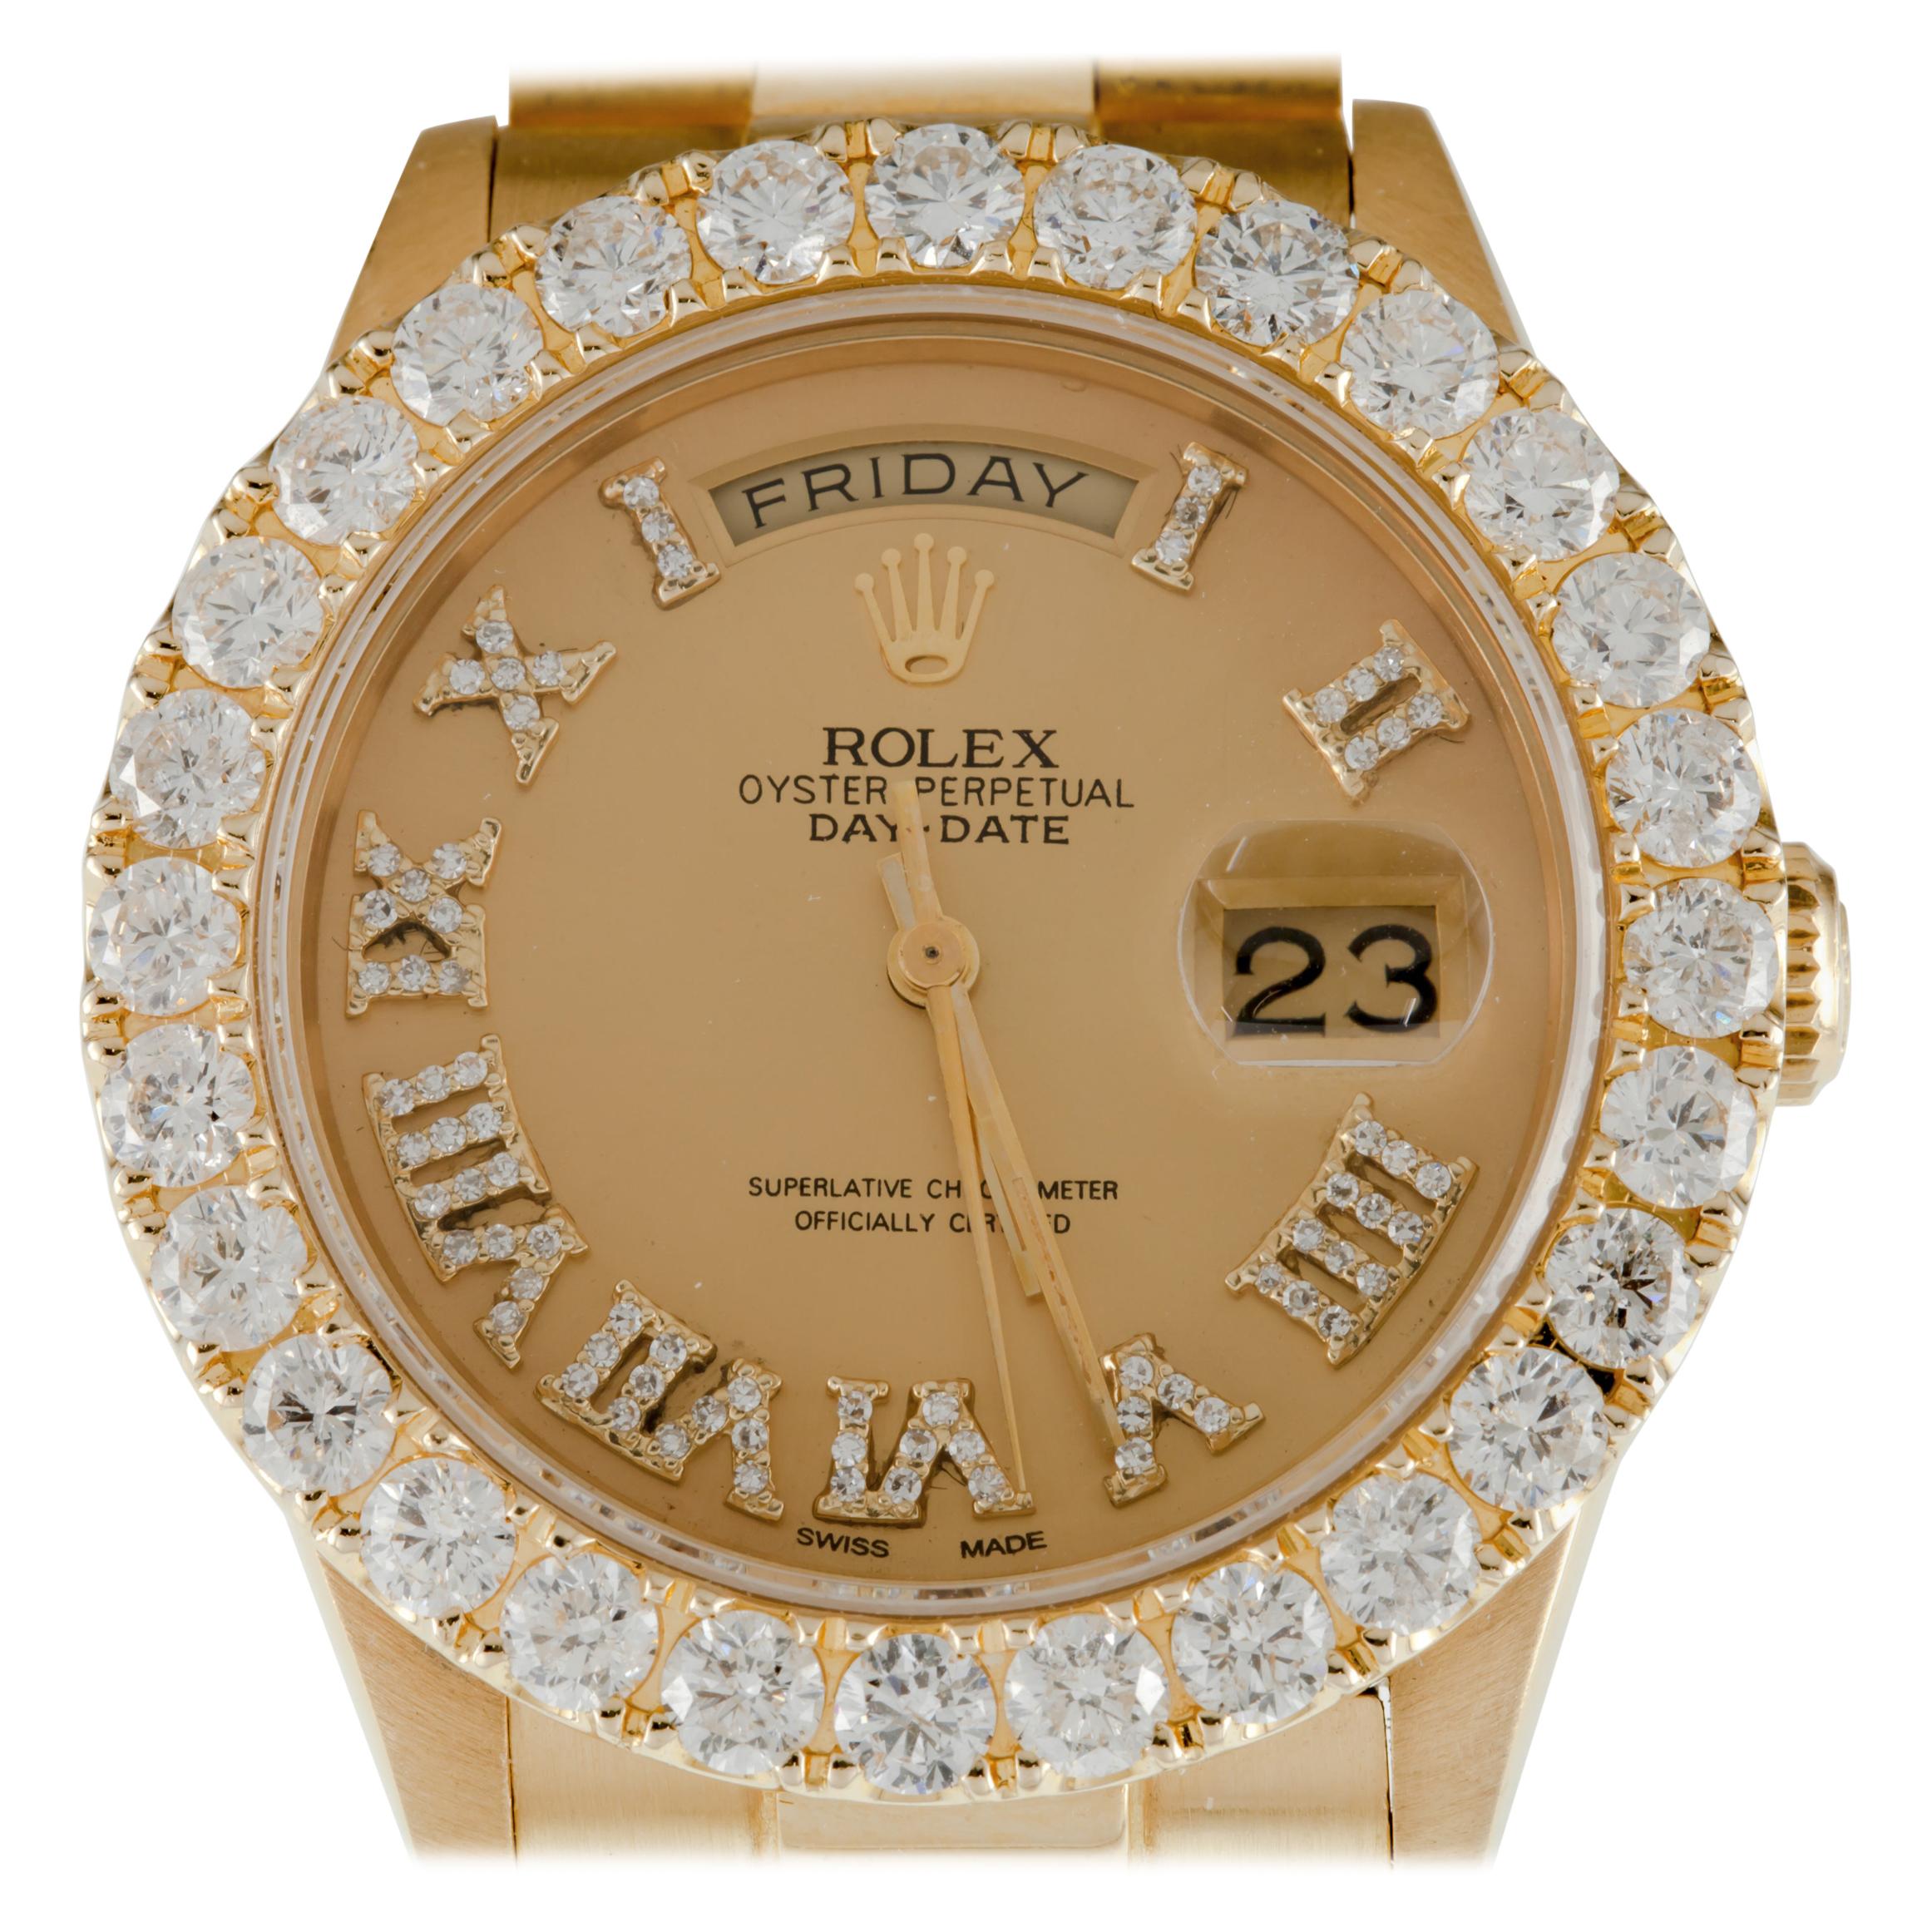 Rolex Men's 18k Yellow Gold President 18038 with Diamond Dial and Bezel